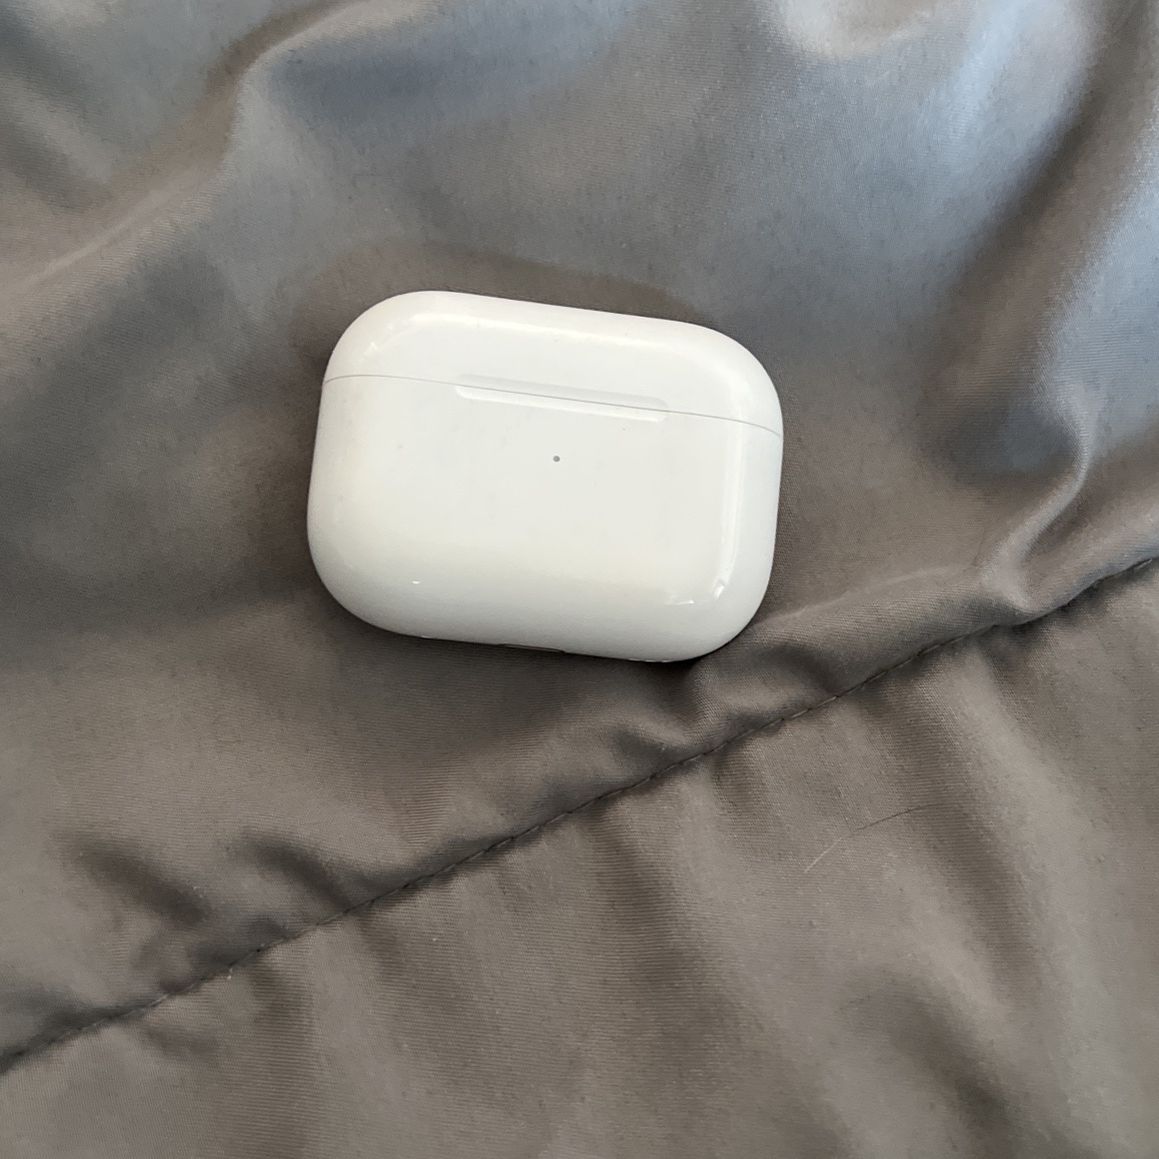 one airpod is in it i lost the other one 